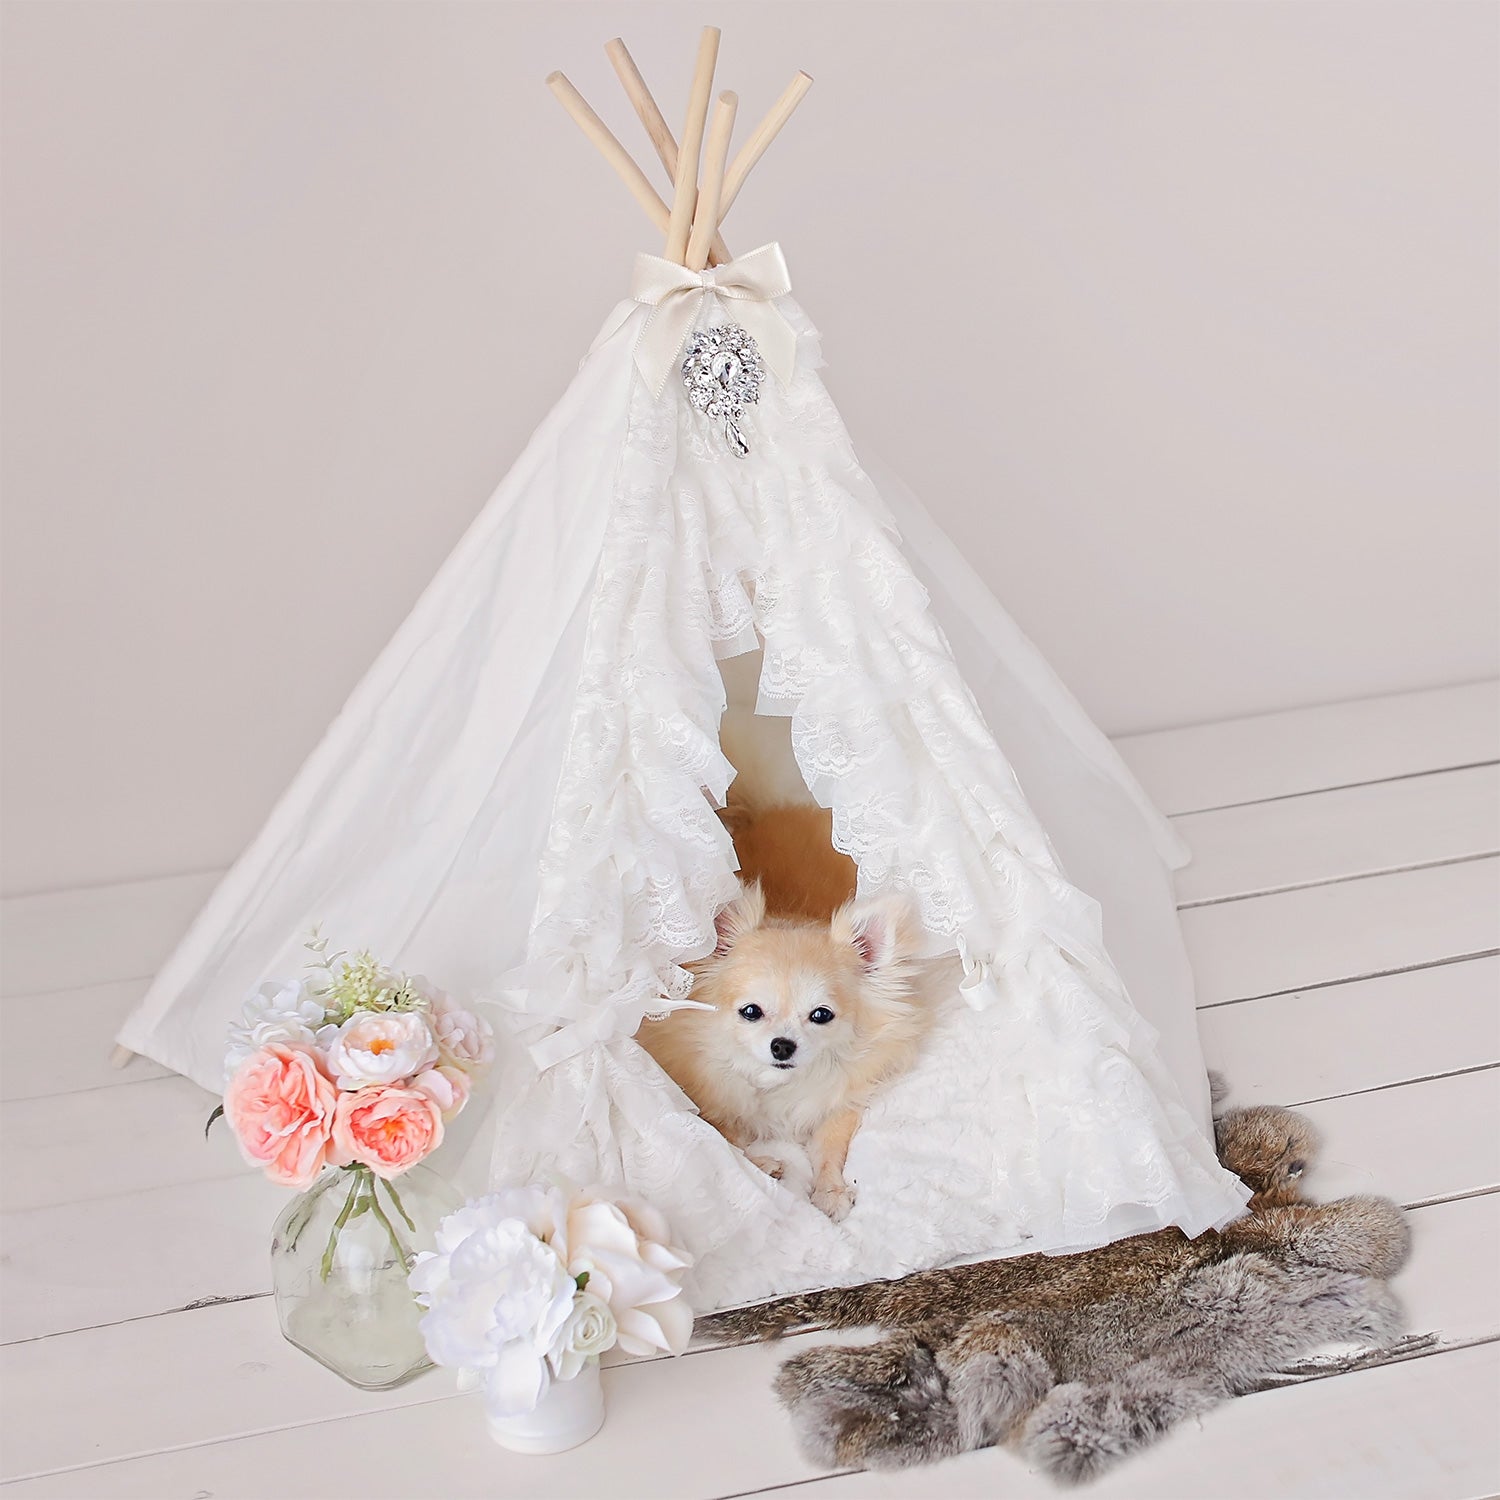 Pet Boutique - Dog Bed - Dog House - Lullaby Tent Dog Bed by Hello Doggie